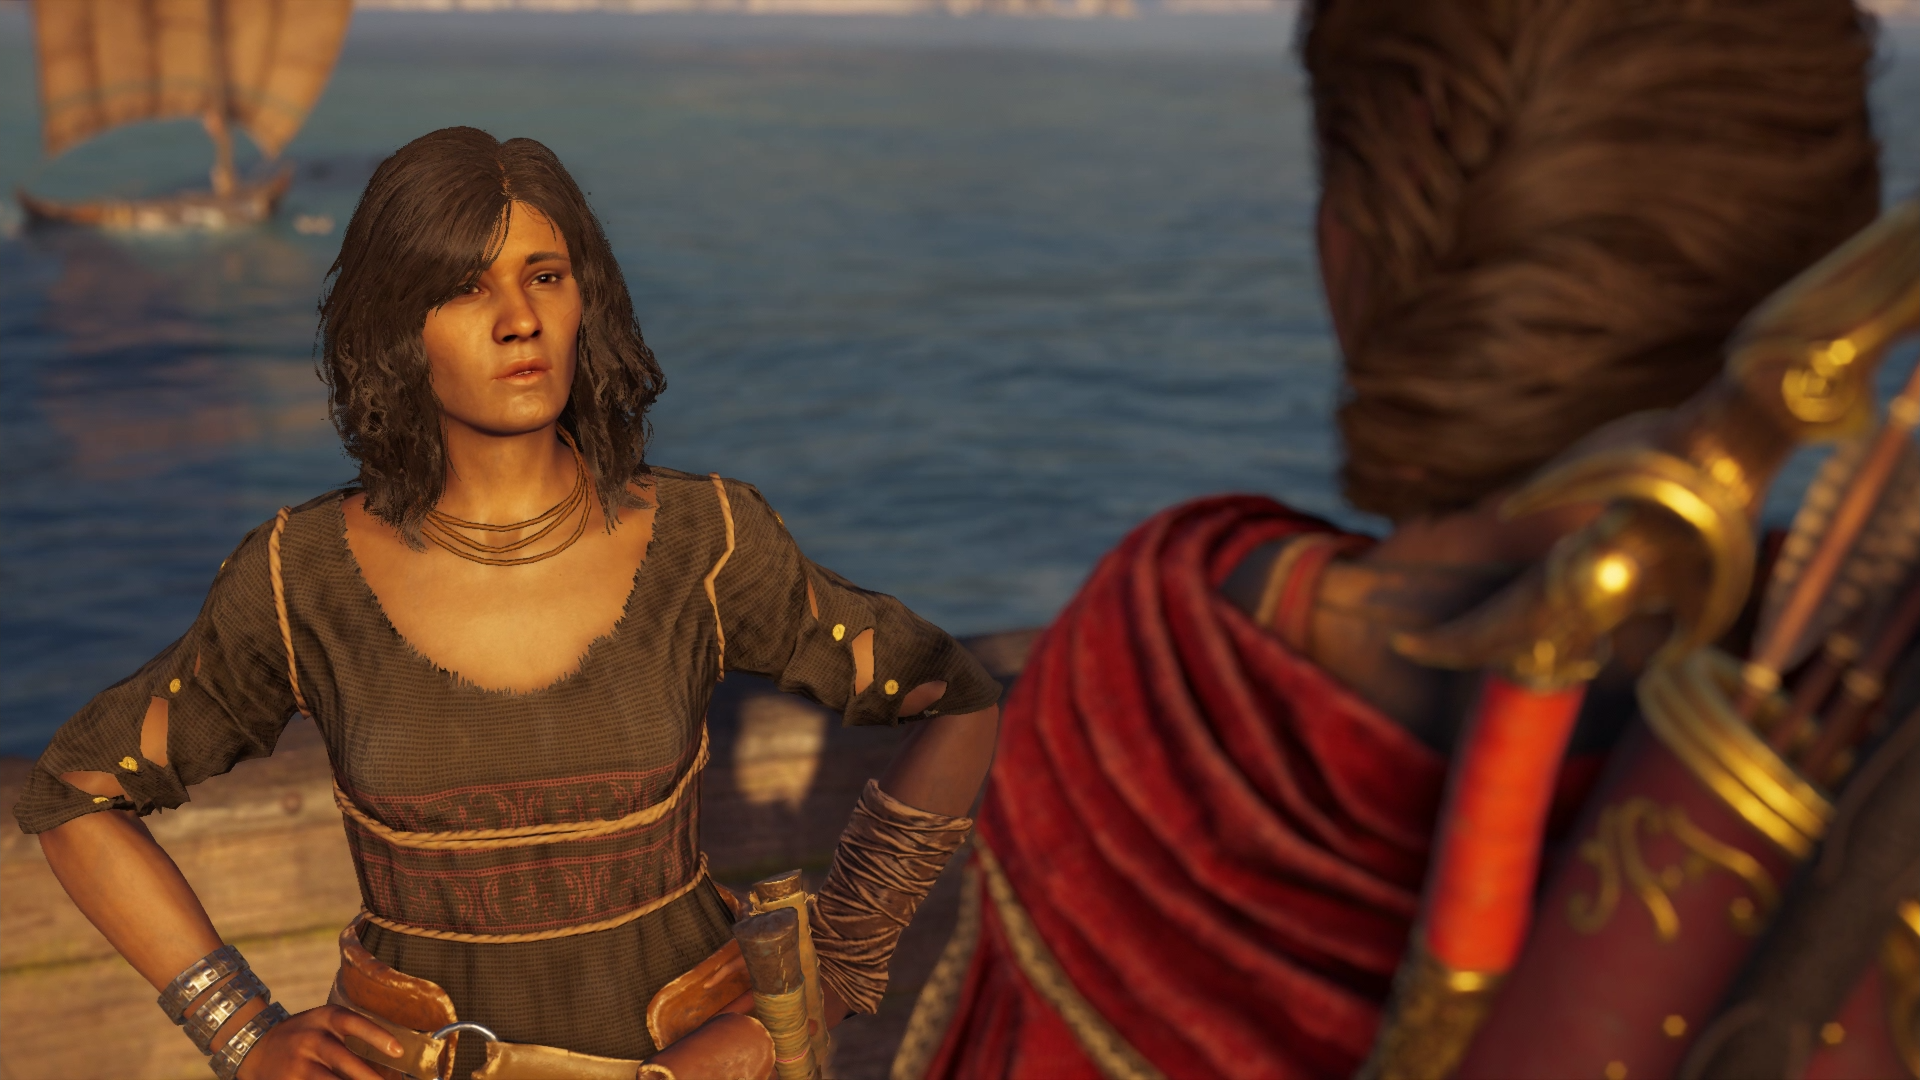 How long is Assassin's Creed Odyssey - Those Who Are Treasured?